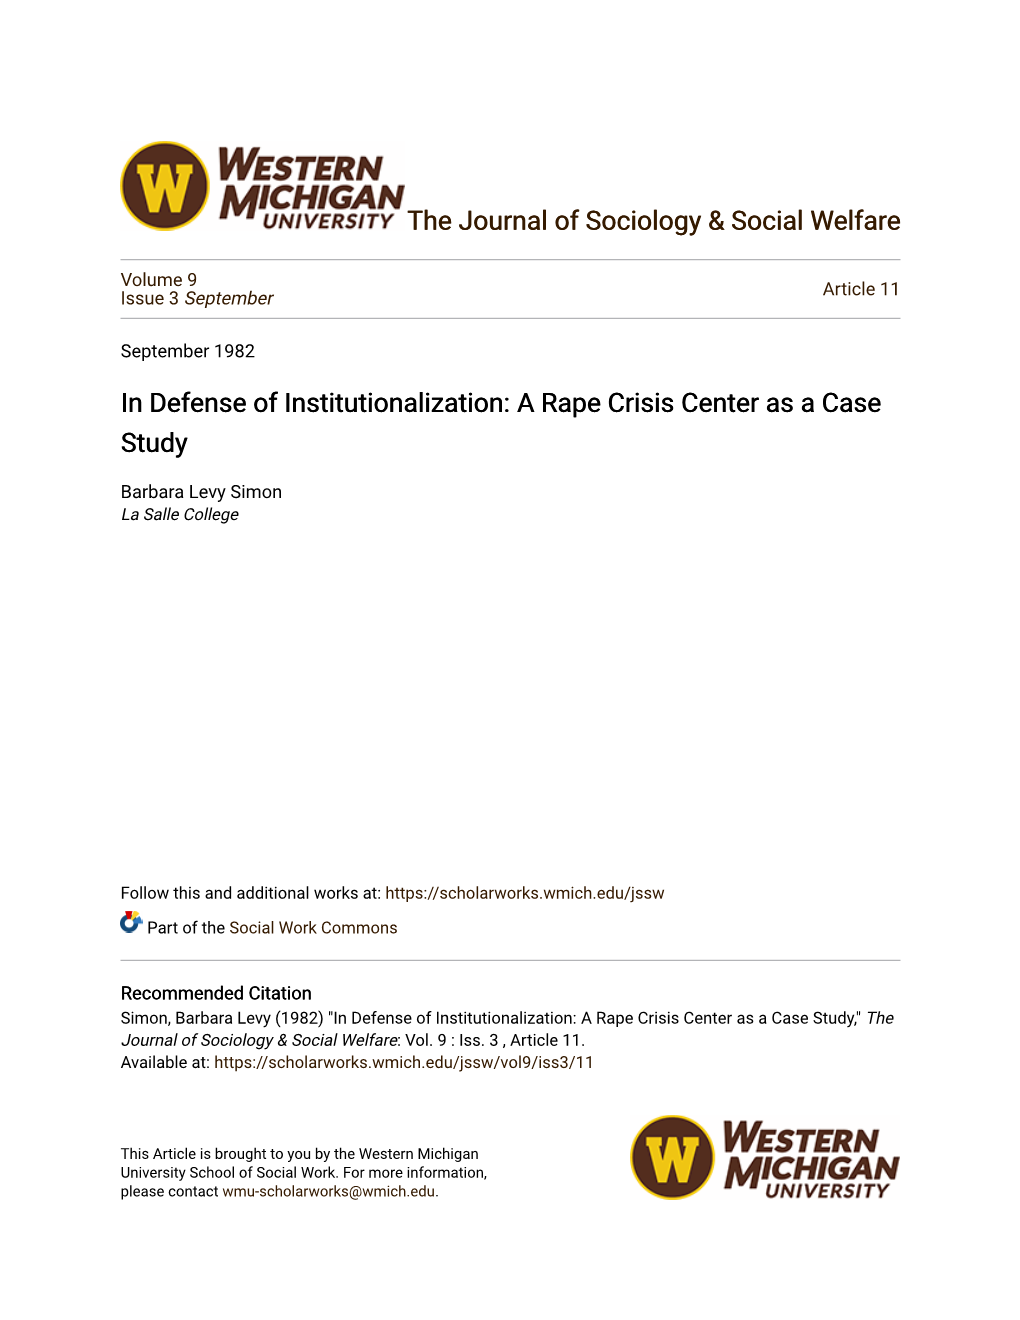 In Defense of Institutionalization: a Rape Crisis Center As a Case Study